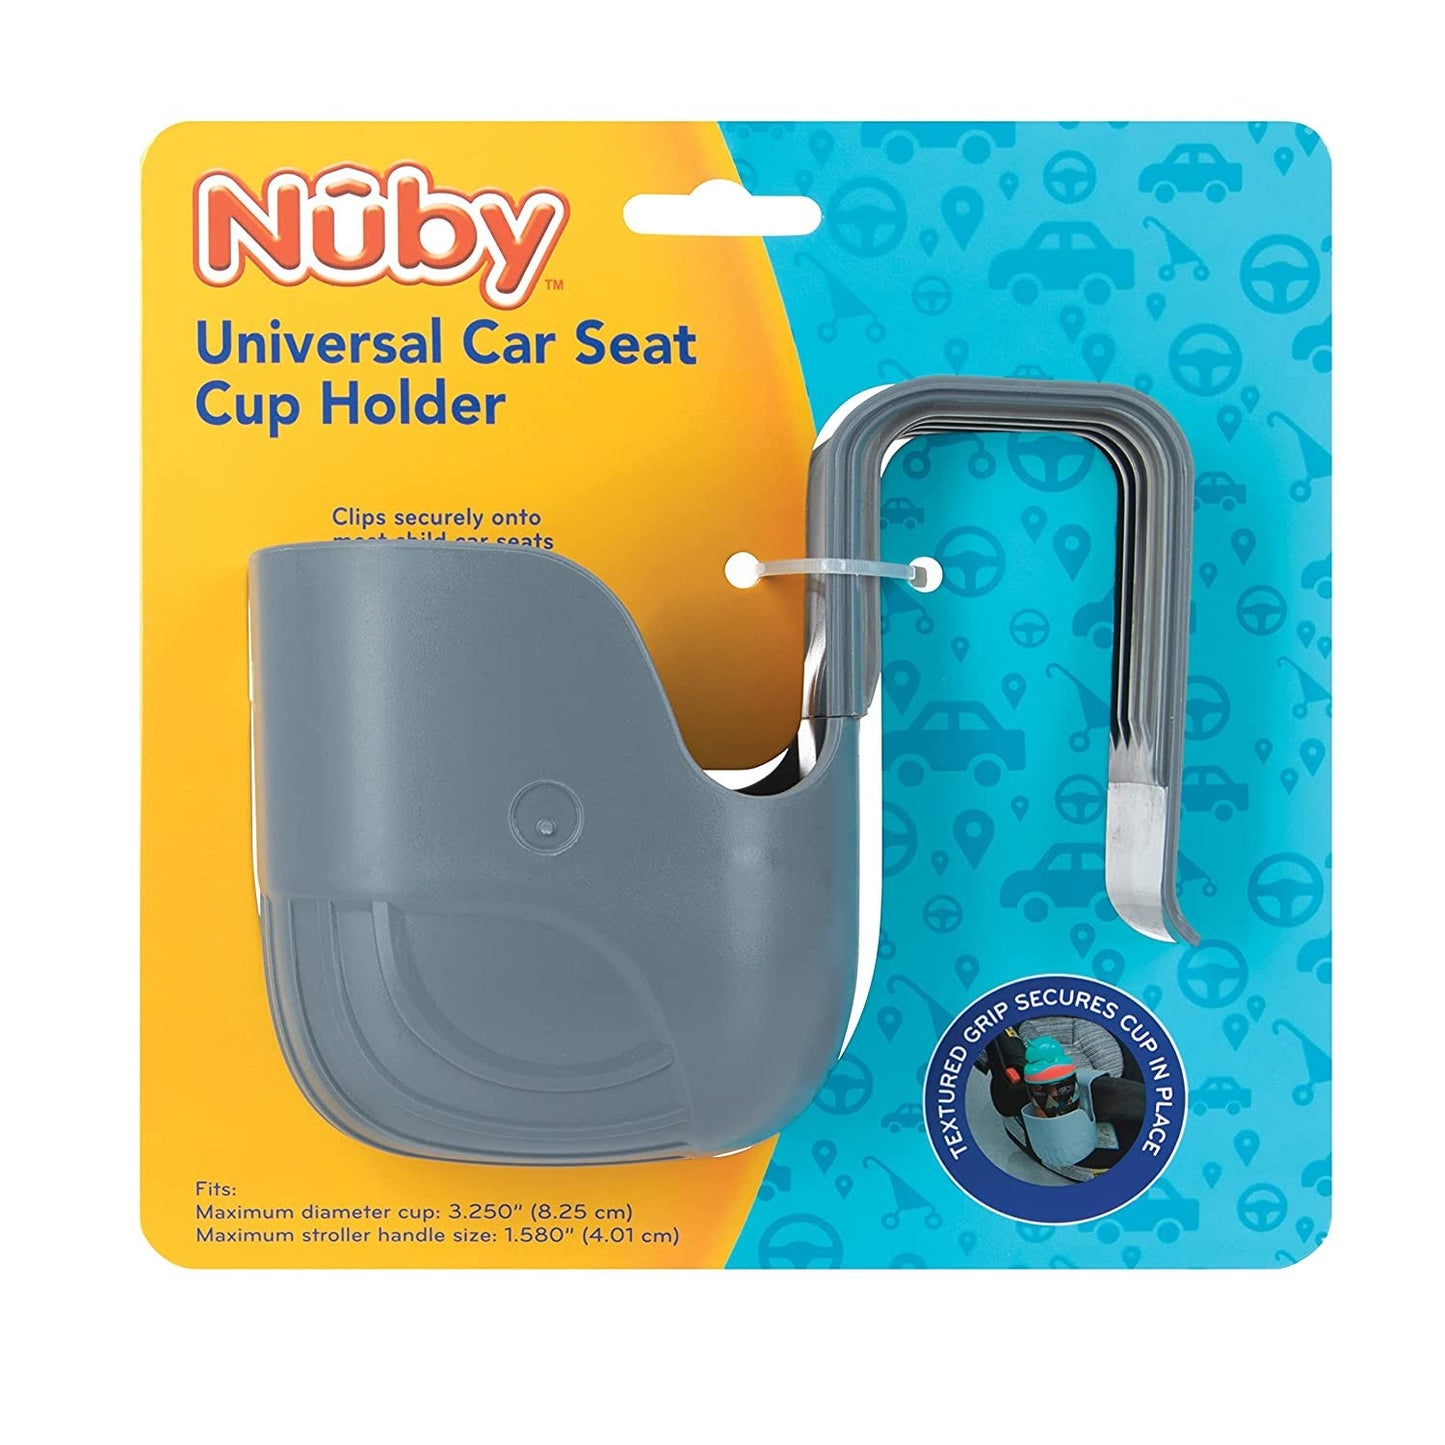 Nuby Universal Car Seat or Stroller Cup Holder- Grey, Fun Whale Character